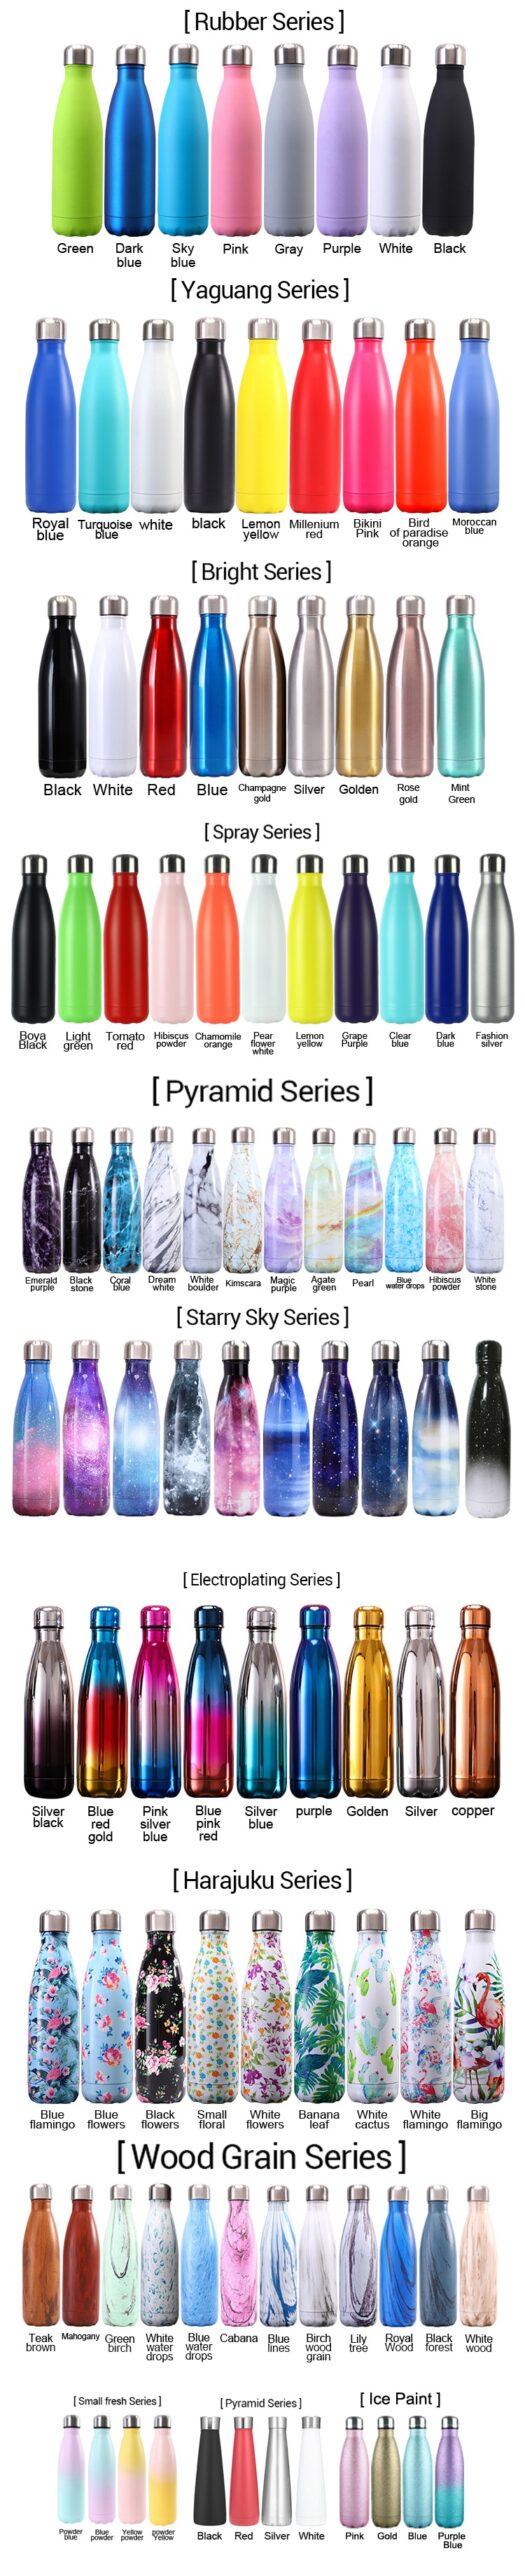 088-091 LOGO Custom Stainless Steel Bottle For Water Thermos Vacuum Insulated Cup Double-Wall Travel Drinkware Sports Flask